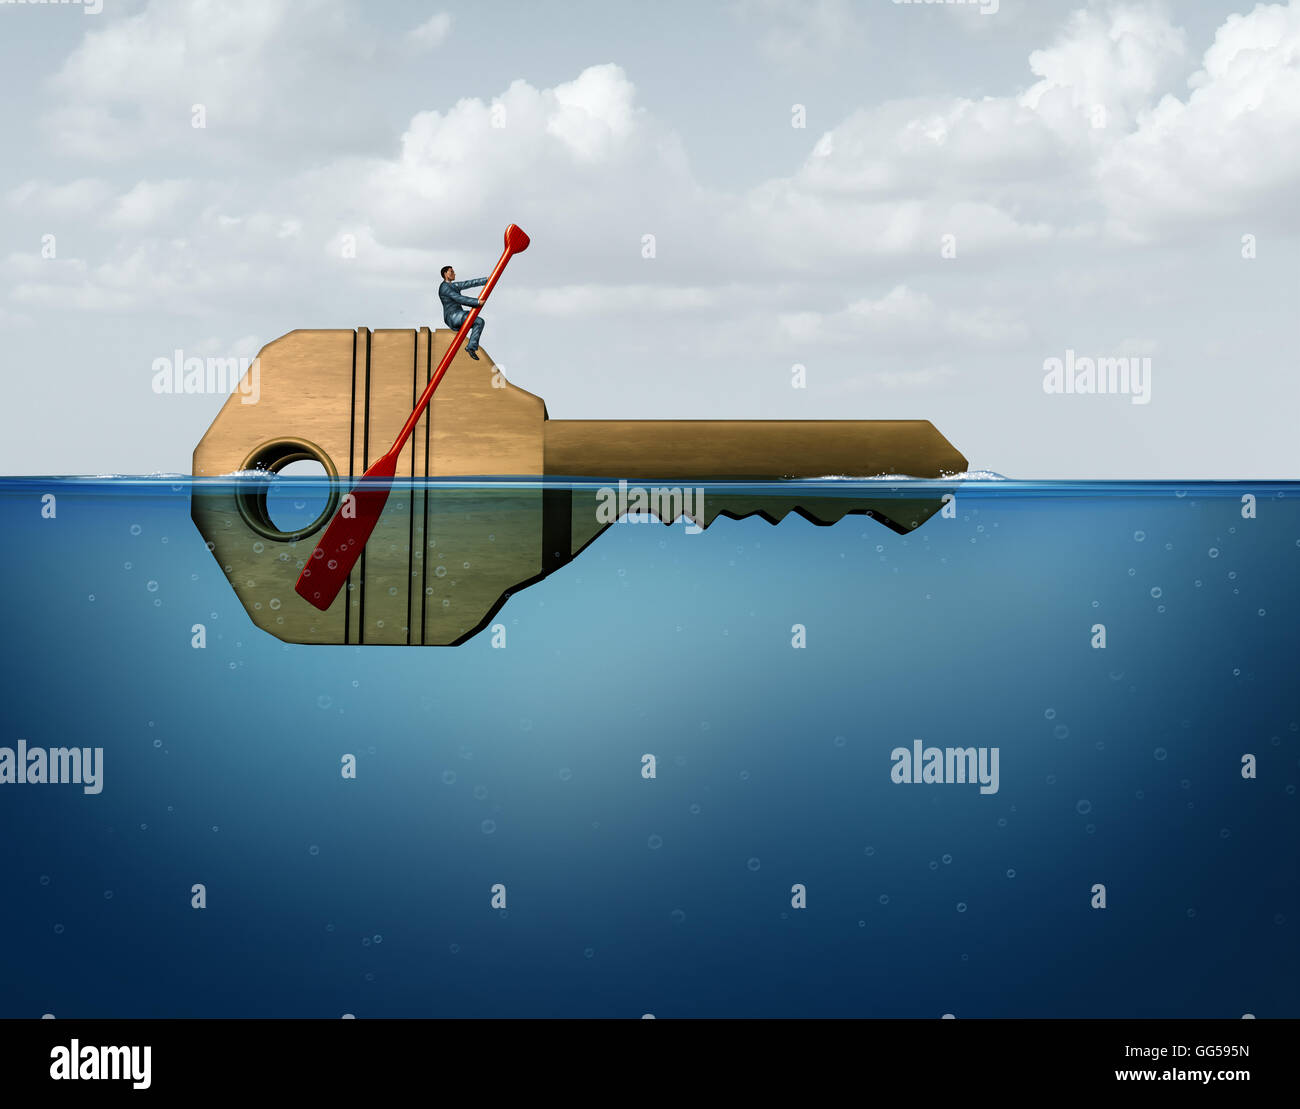 Solution management business concept as a leader businessman guiding and directing a giant key in the water as a metaphor for corporate guidance and direction strategy with 3D illustration elements. Stock Photo